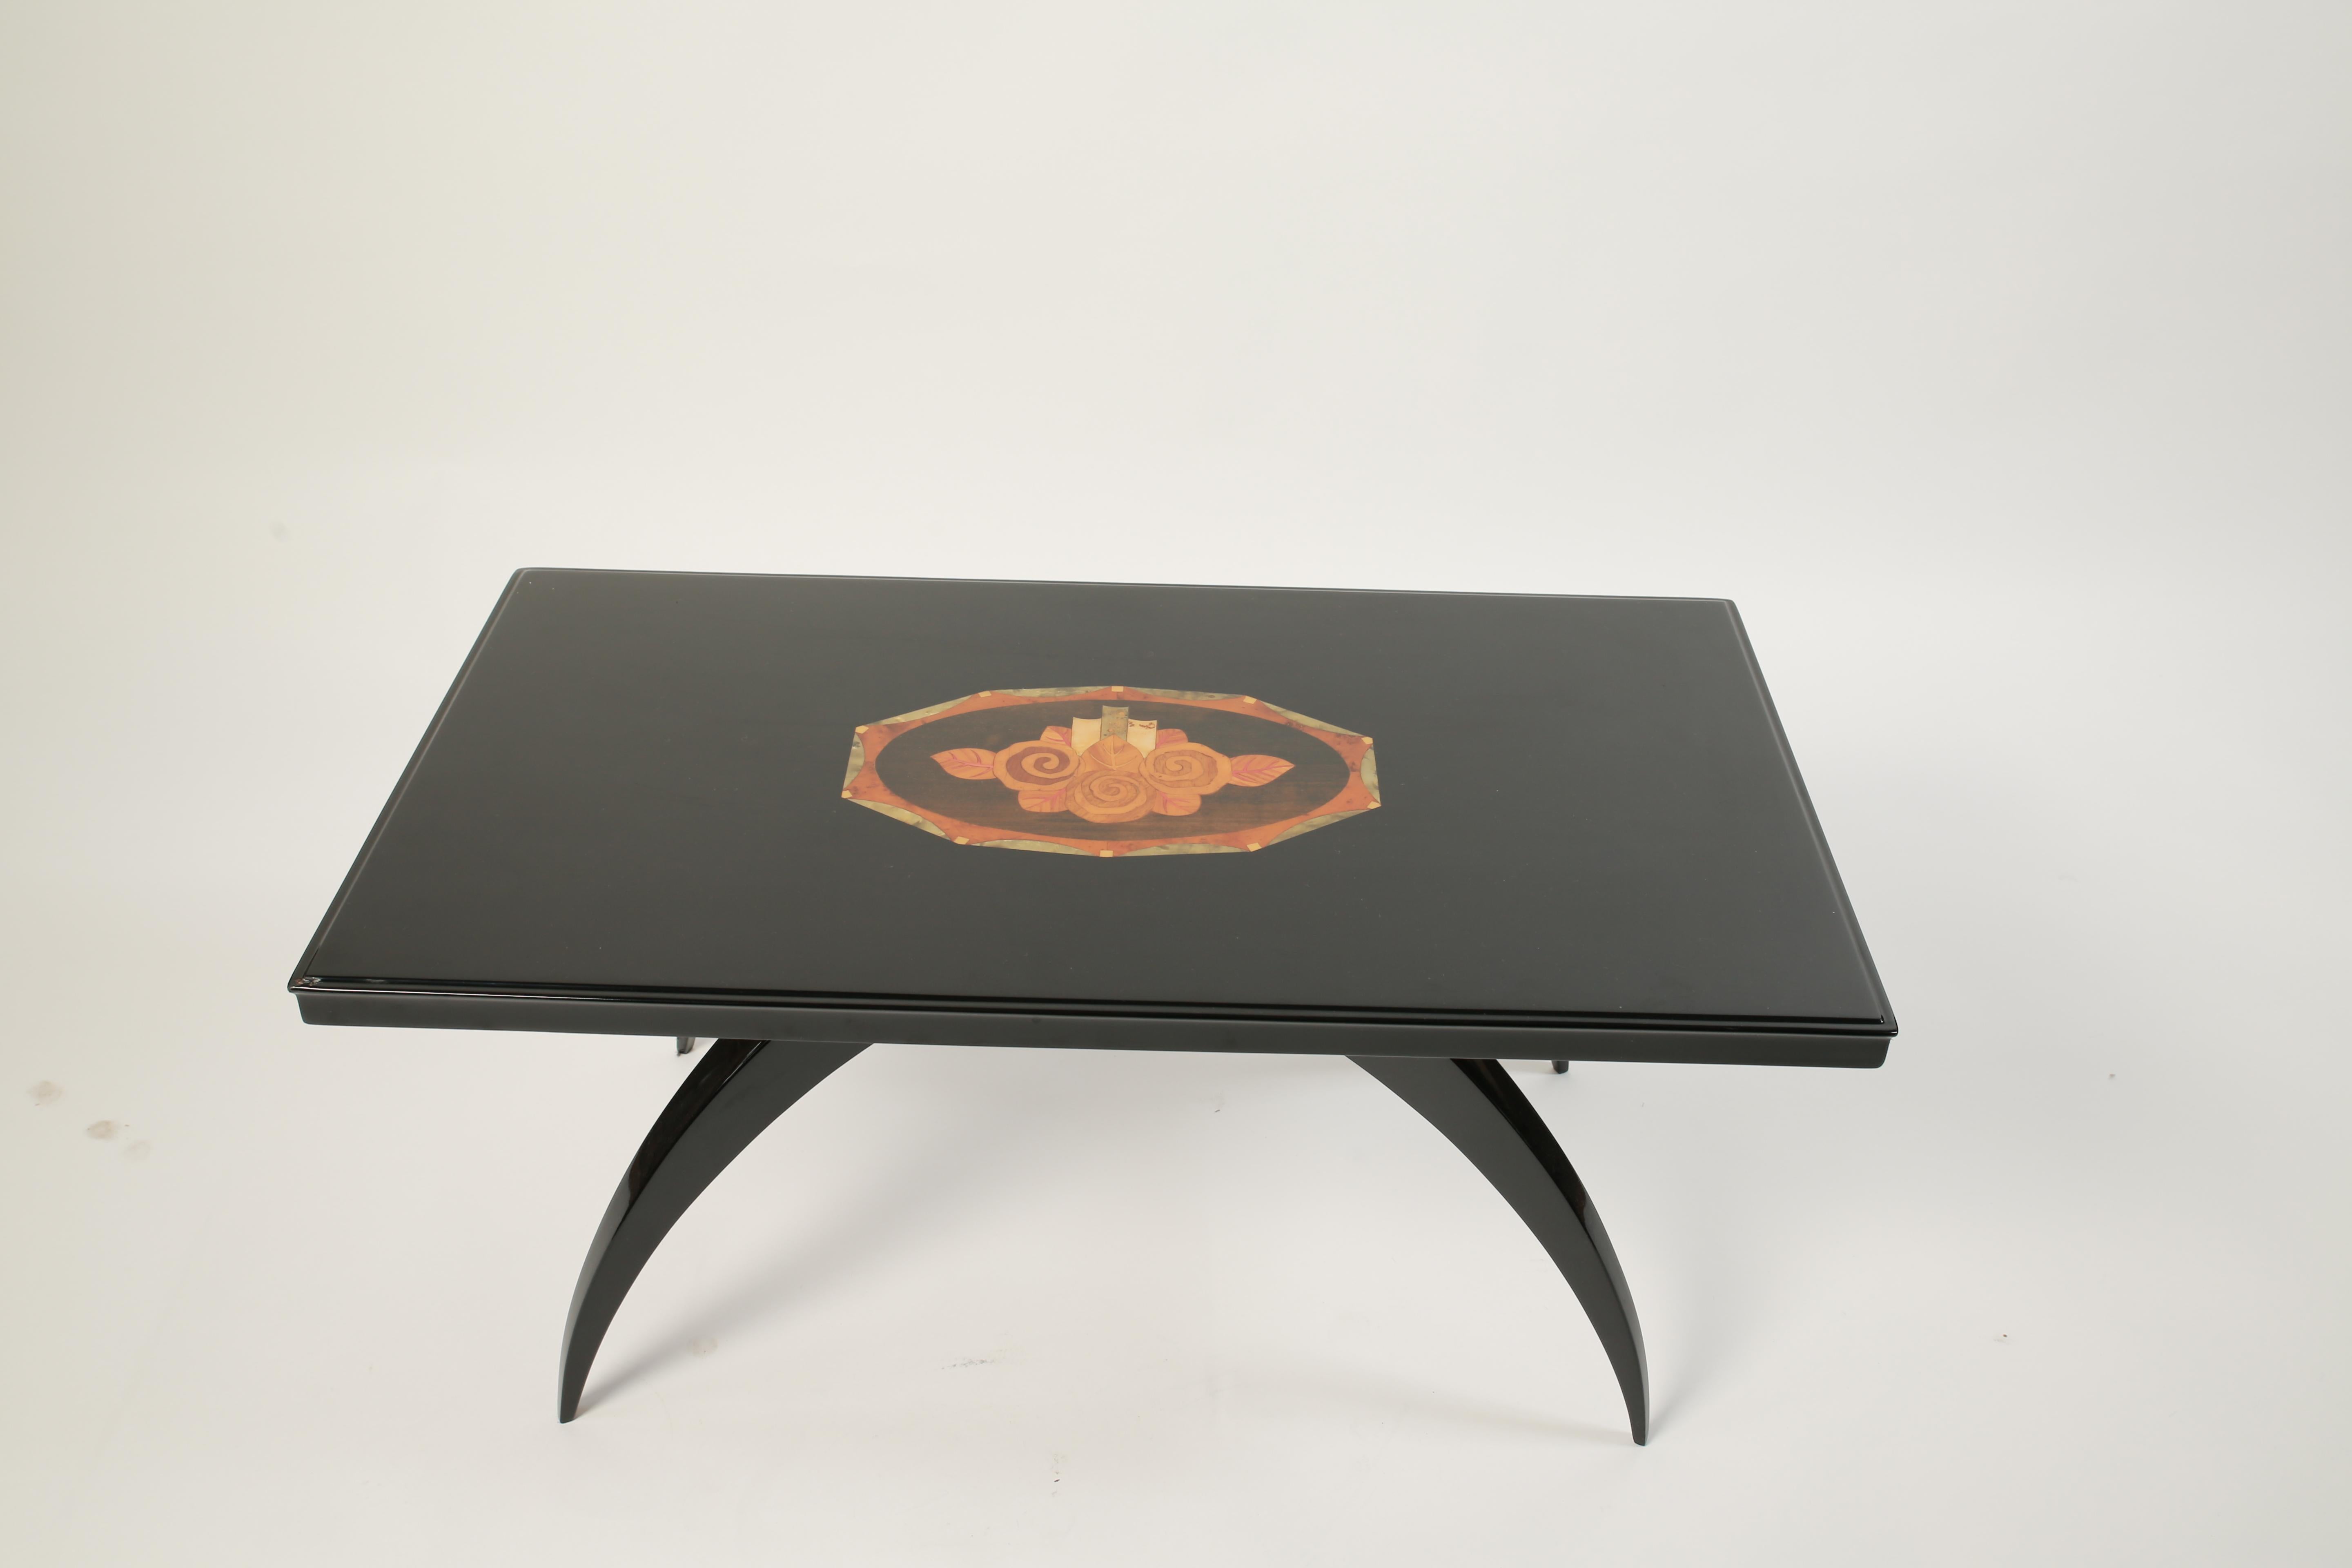 Lacquer Polished Black French Art Deco Side Table with Floral Inlay For Sale